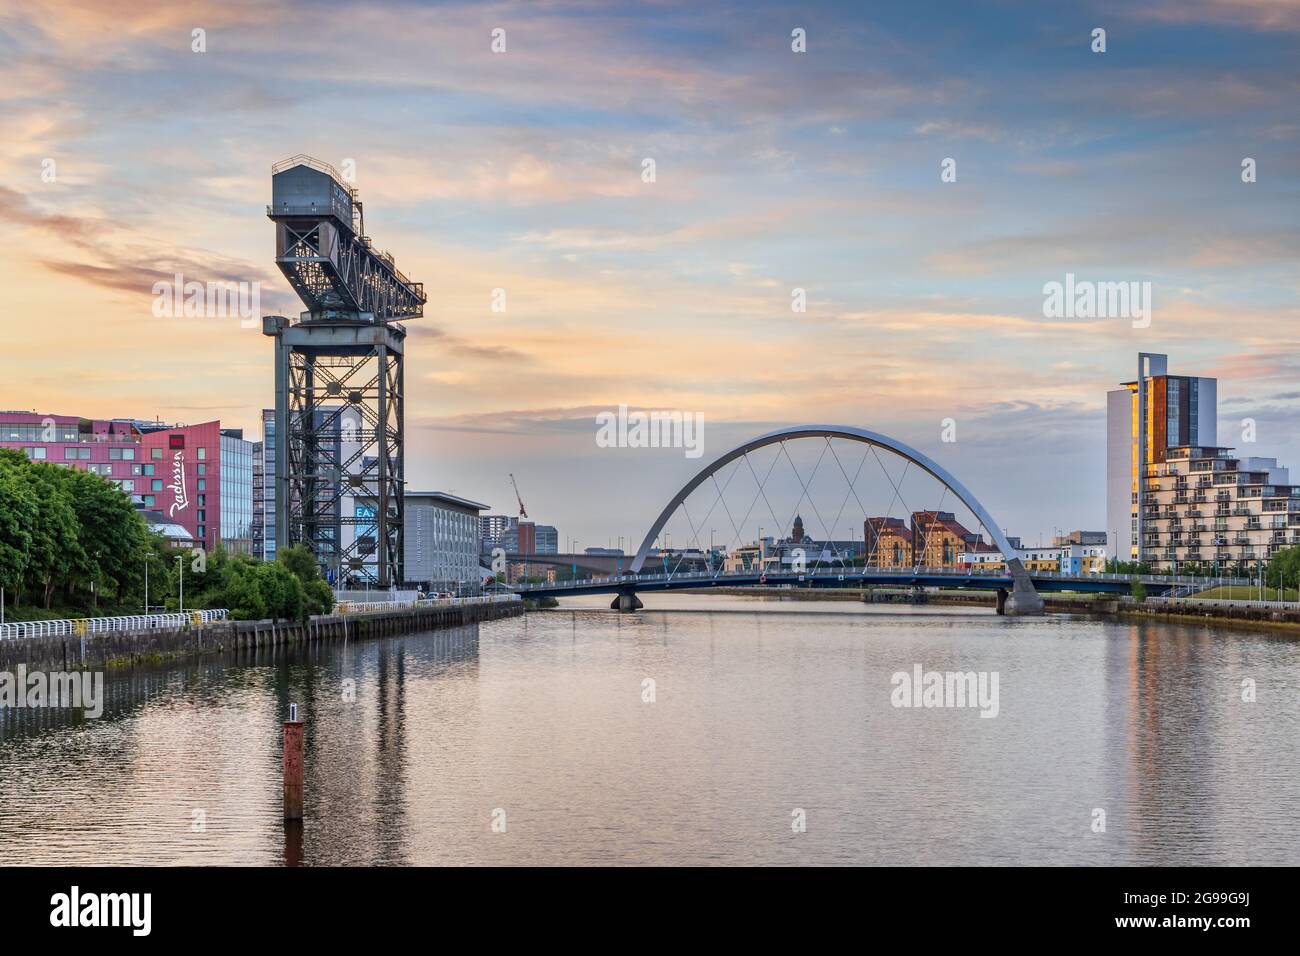 Glasgow's Finnieston Crane & Clyde Arc bridge over the River Clyde in Glasgow, taken just after sunrise. Stock Photo